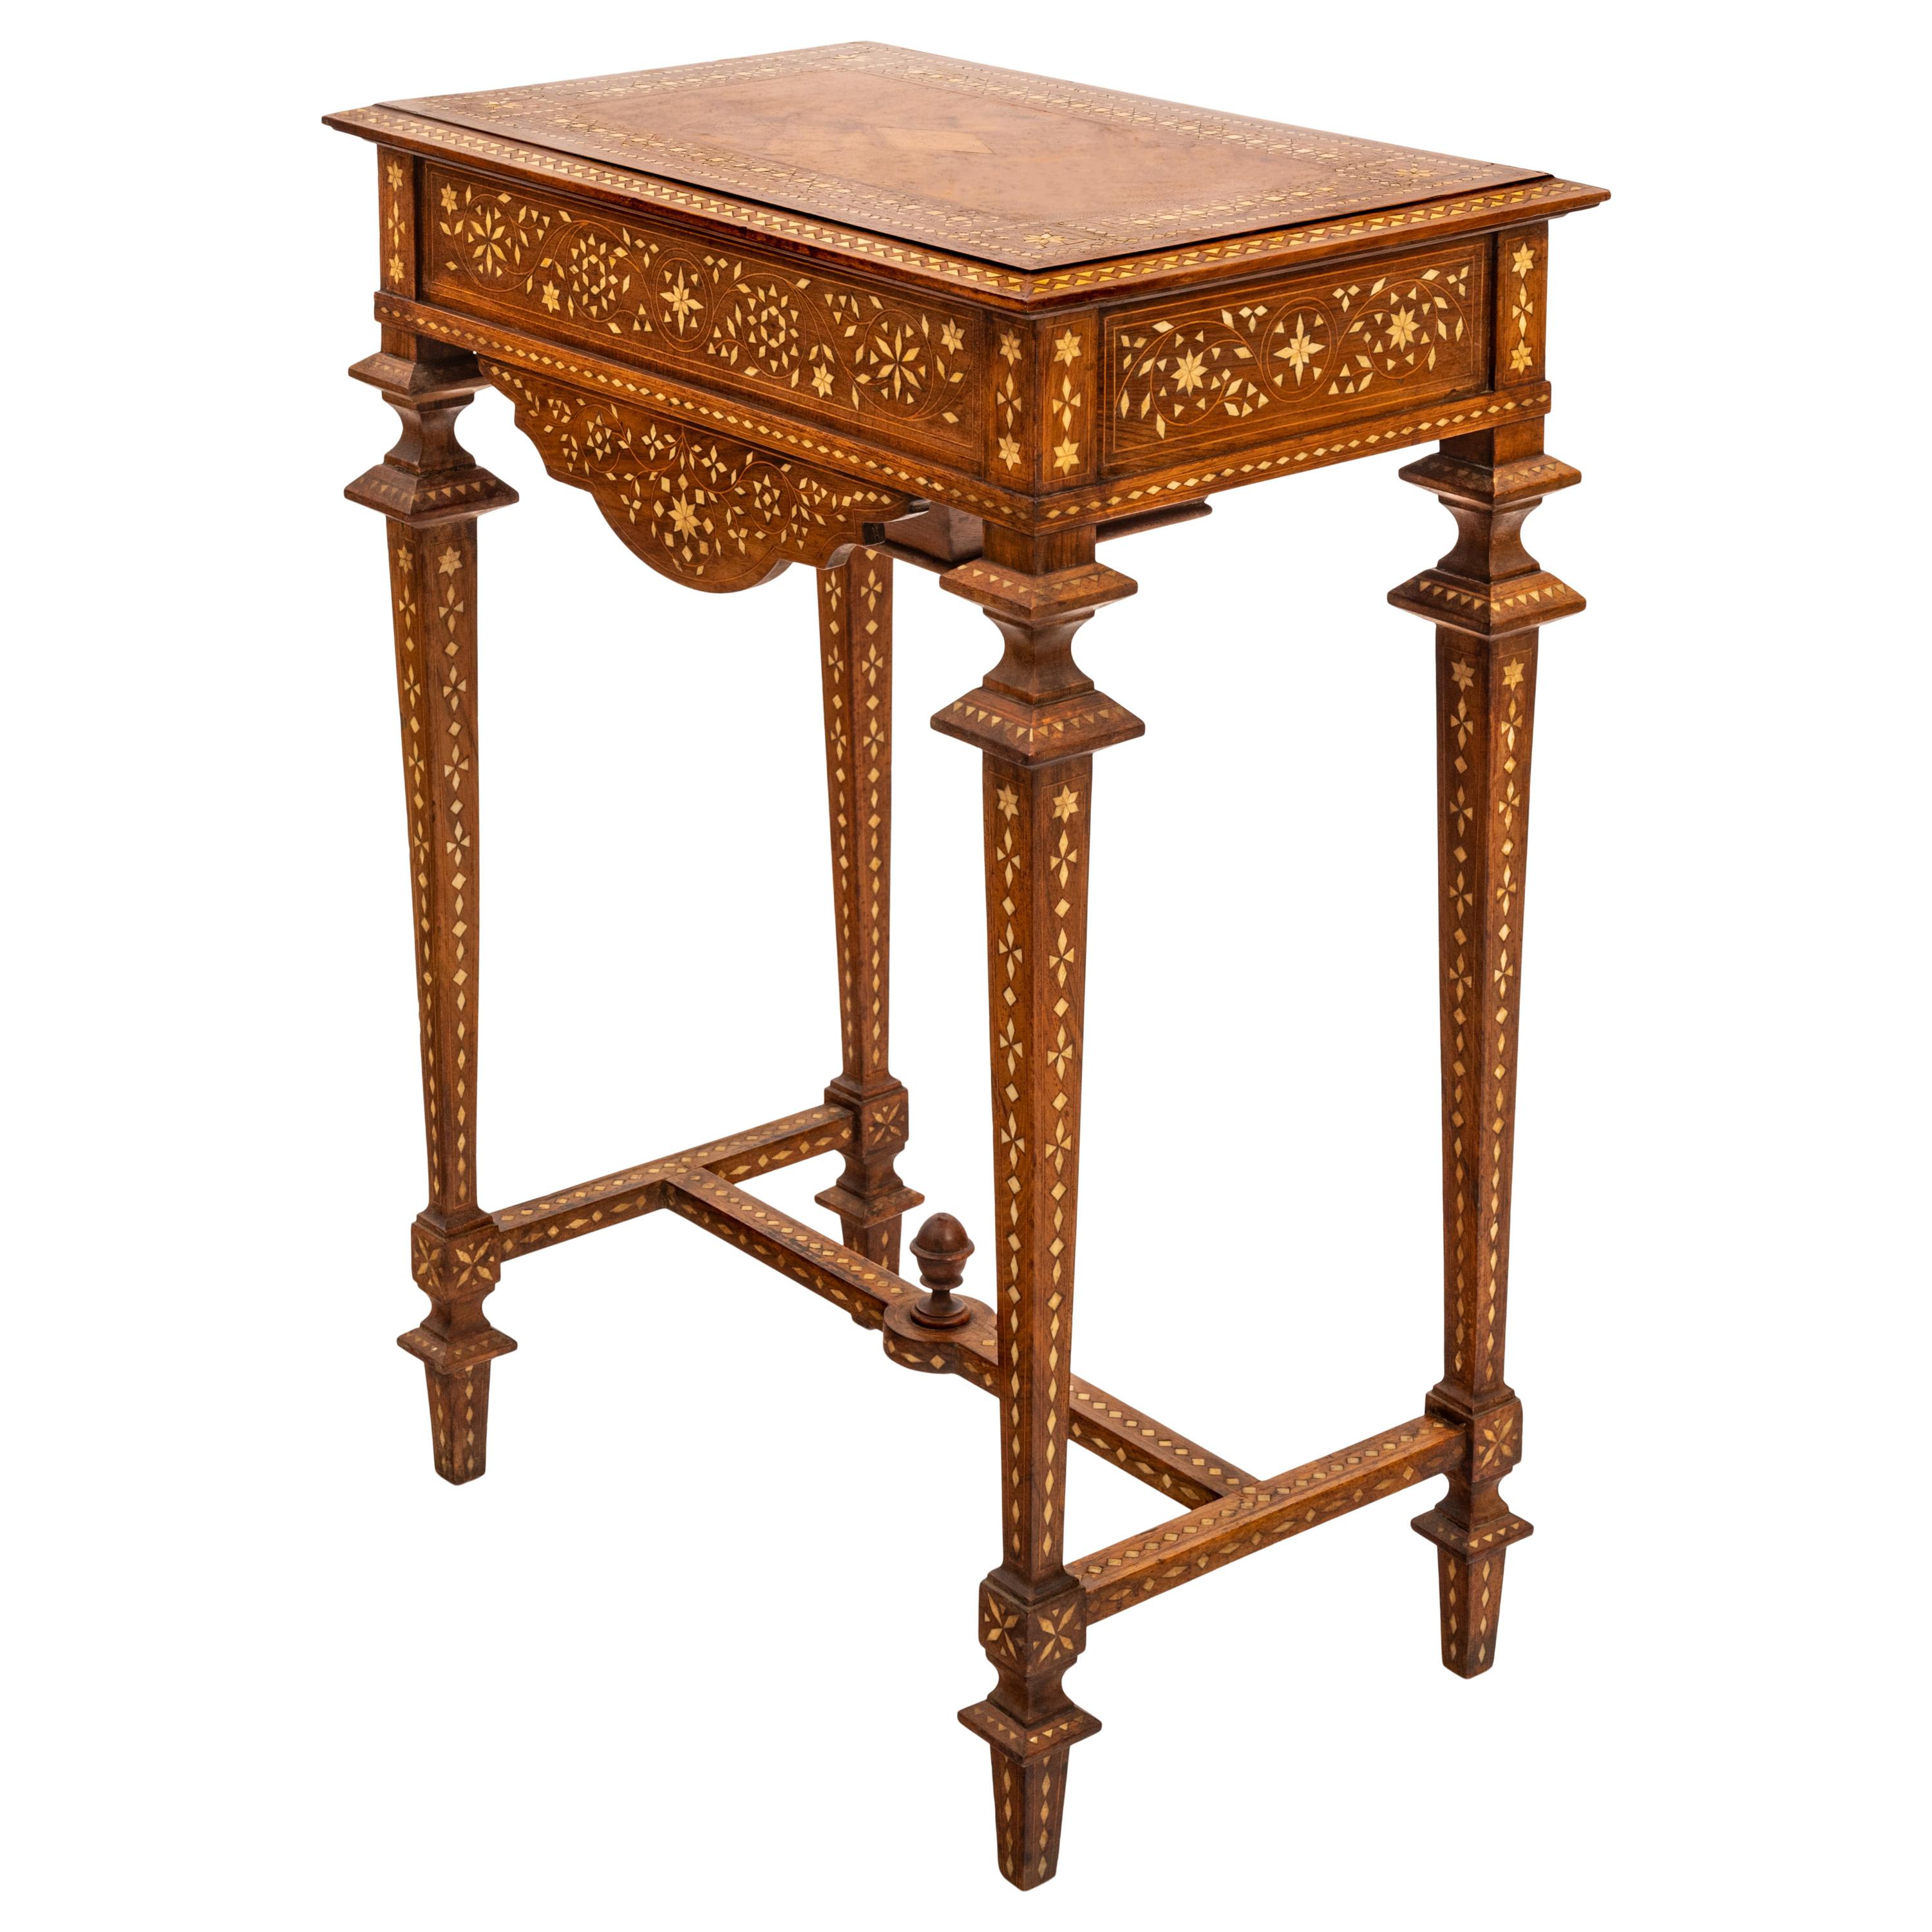 Antique Anglo Indian Teak Mahogany Inlaid Marquetry Work Side Sewing Table 1870 3